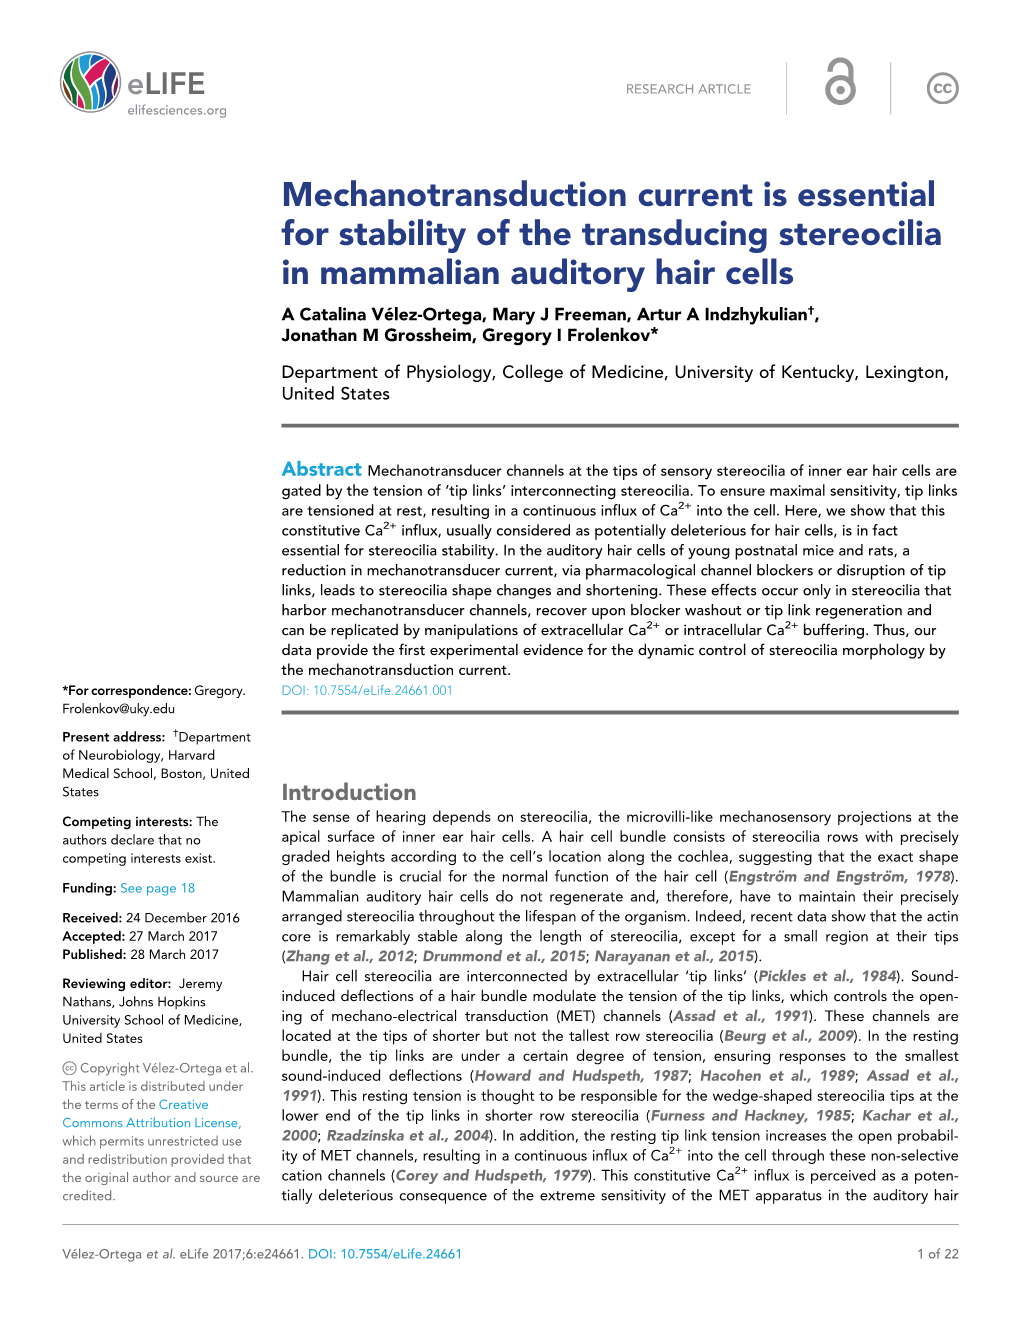 Mechanotransduction Current Is Essential for Stability of The